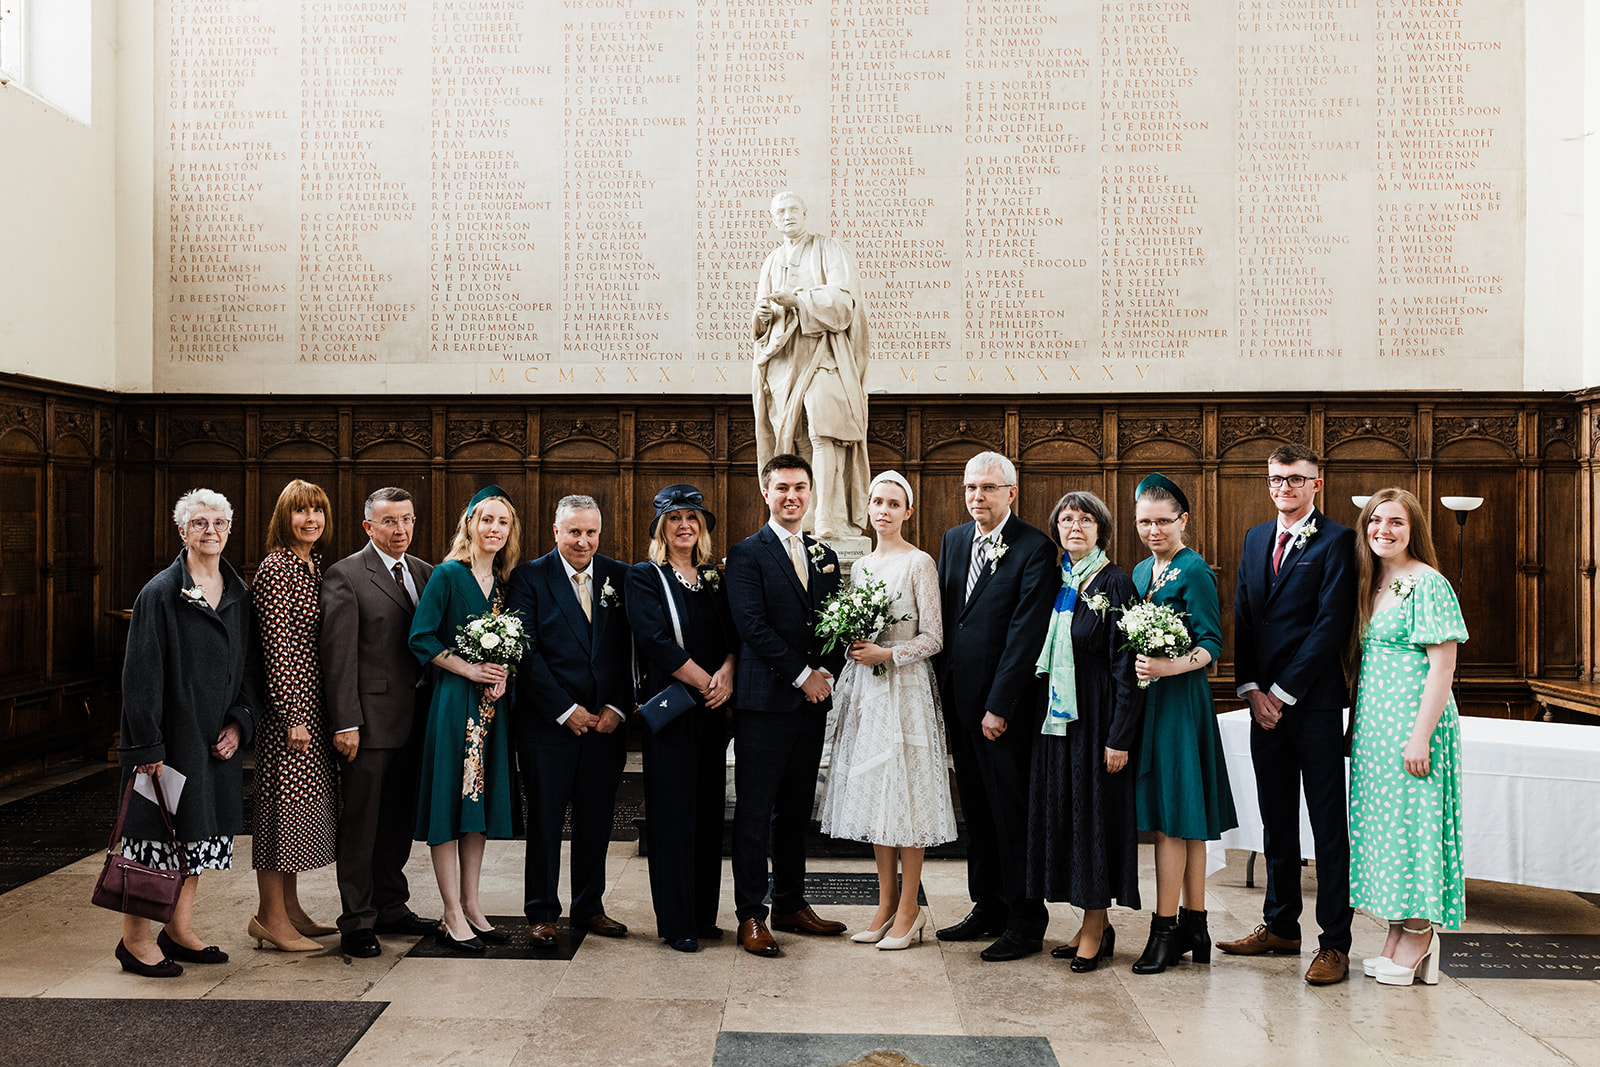 Family Group Photography at Trinity College Chapel, Cambridge